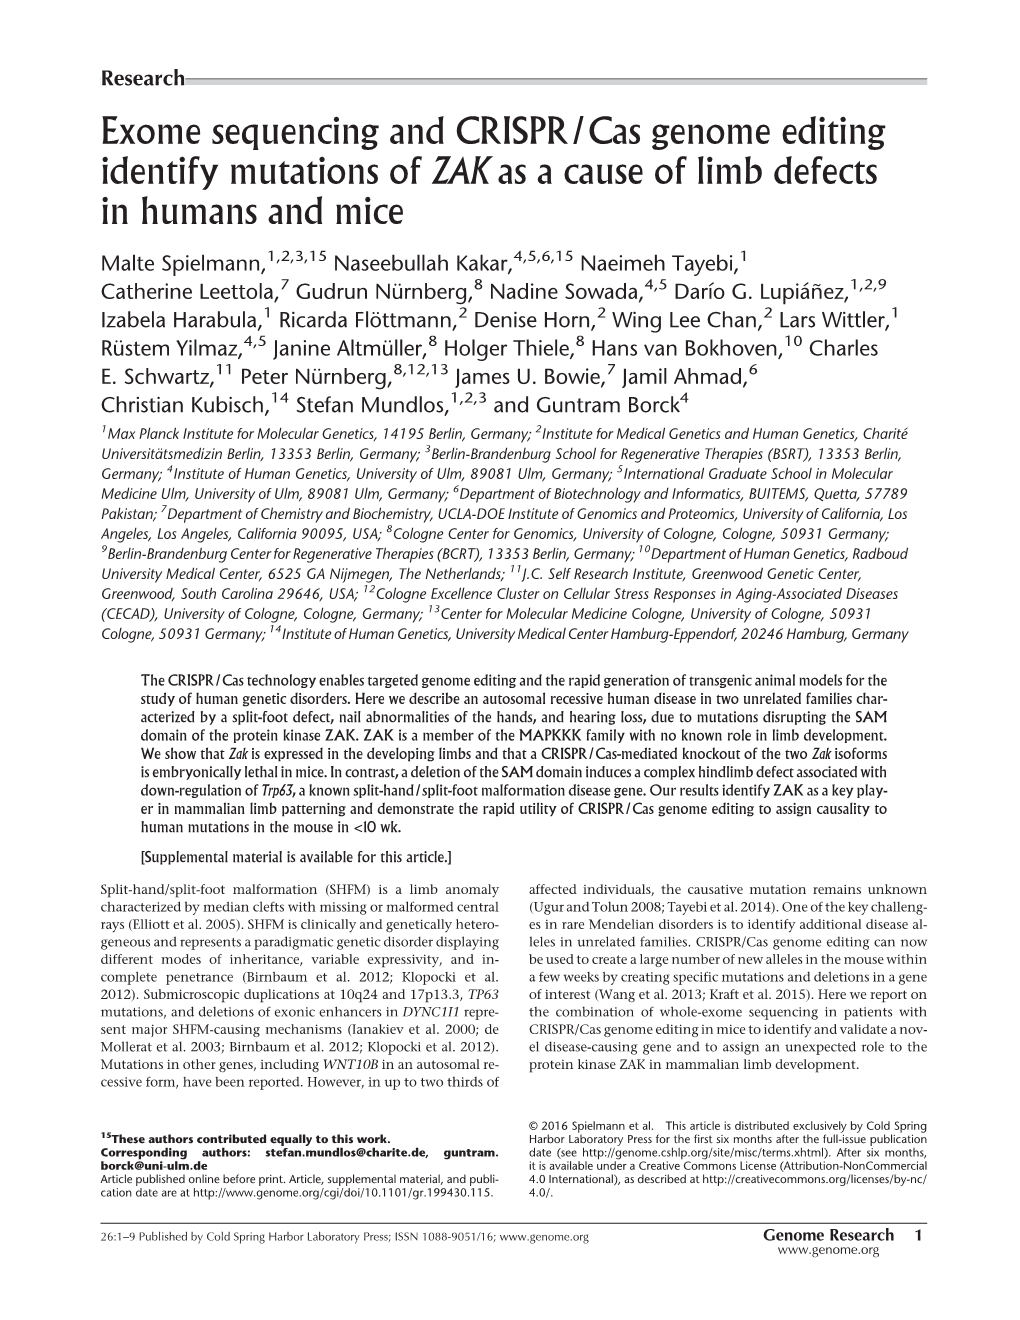 Exome Sequencing and CRISPR/Cas Genome Editing Identify Mutations of ZAK As a Cause of Limb Defects in Humans and Mice